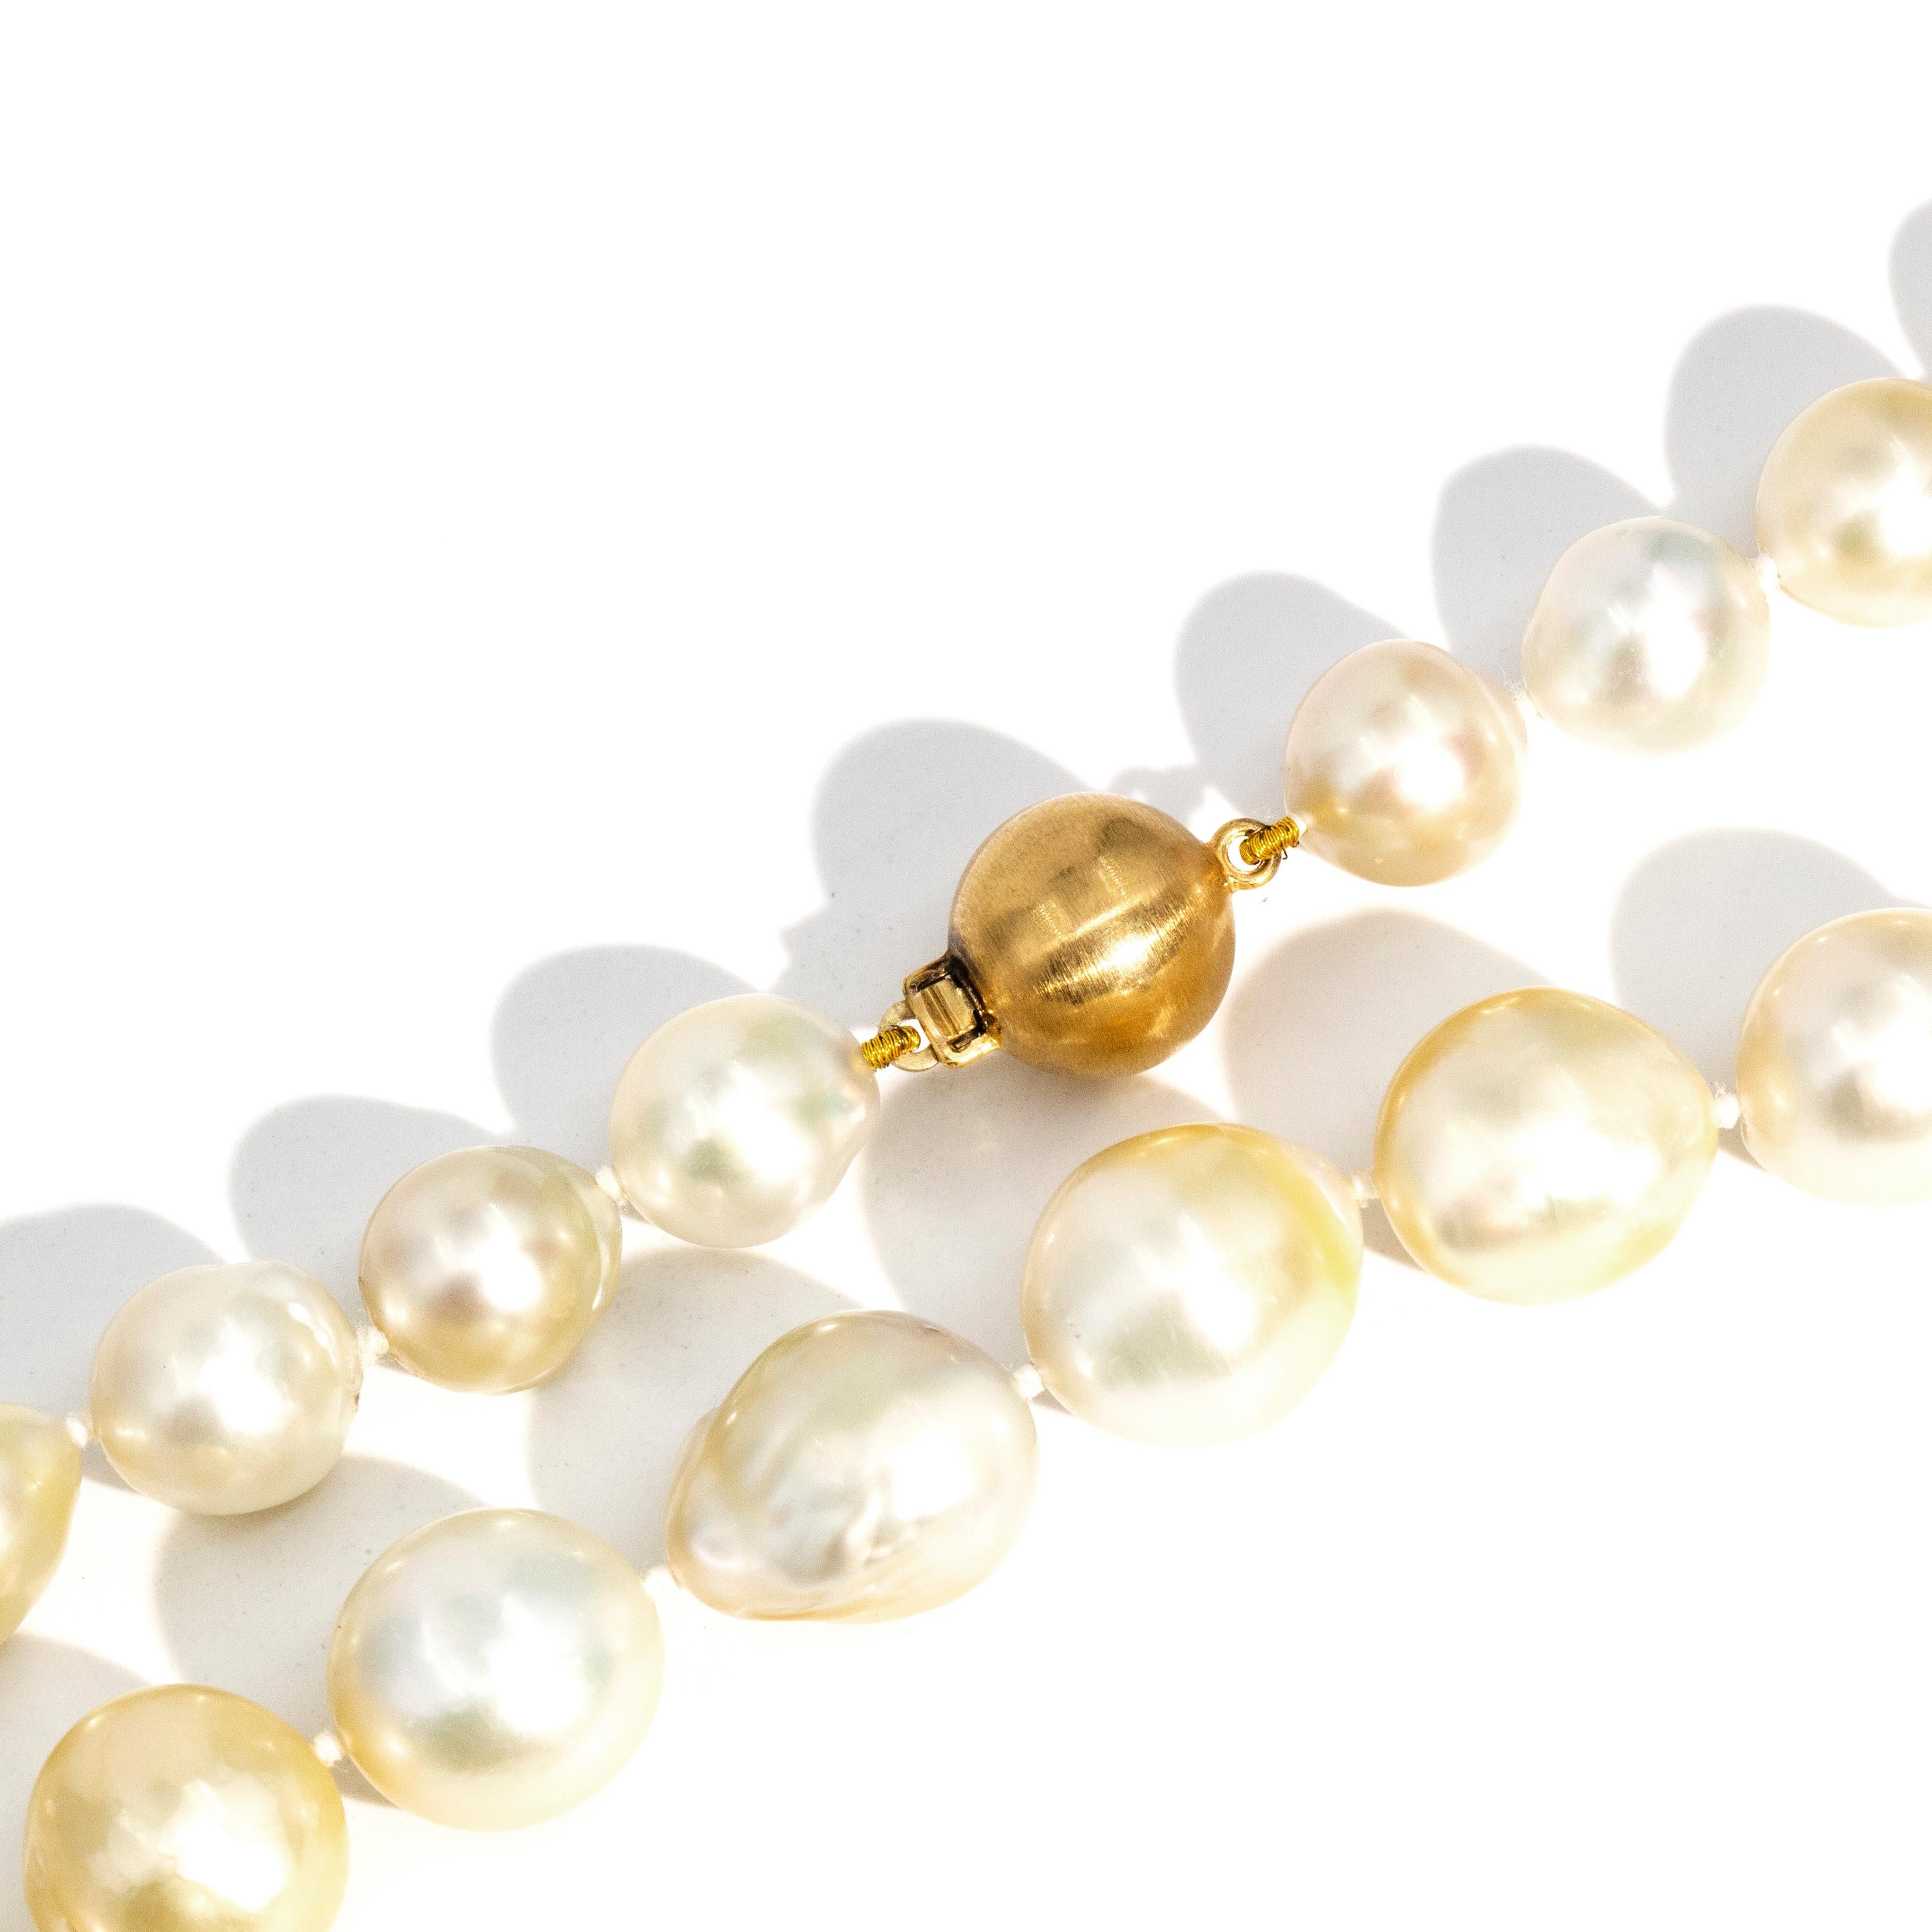 Round Cut Contemporary Lustrous South Sea Pearl Necklace 9 Carat Yellow Gold Sphere Clasp For Sale